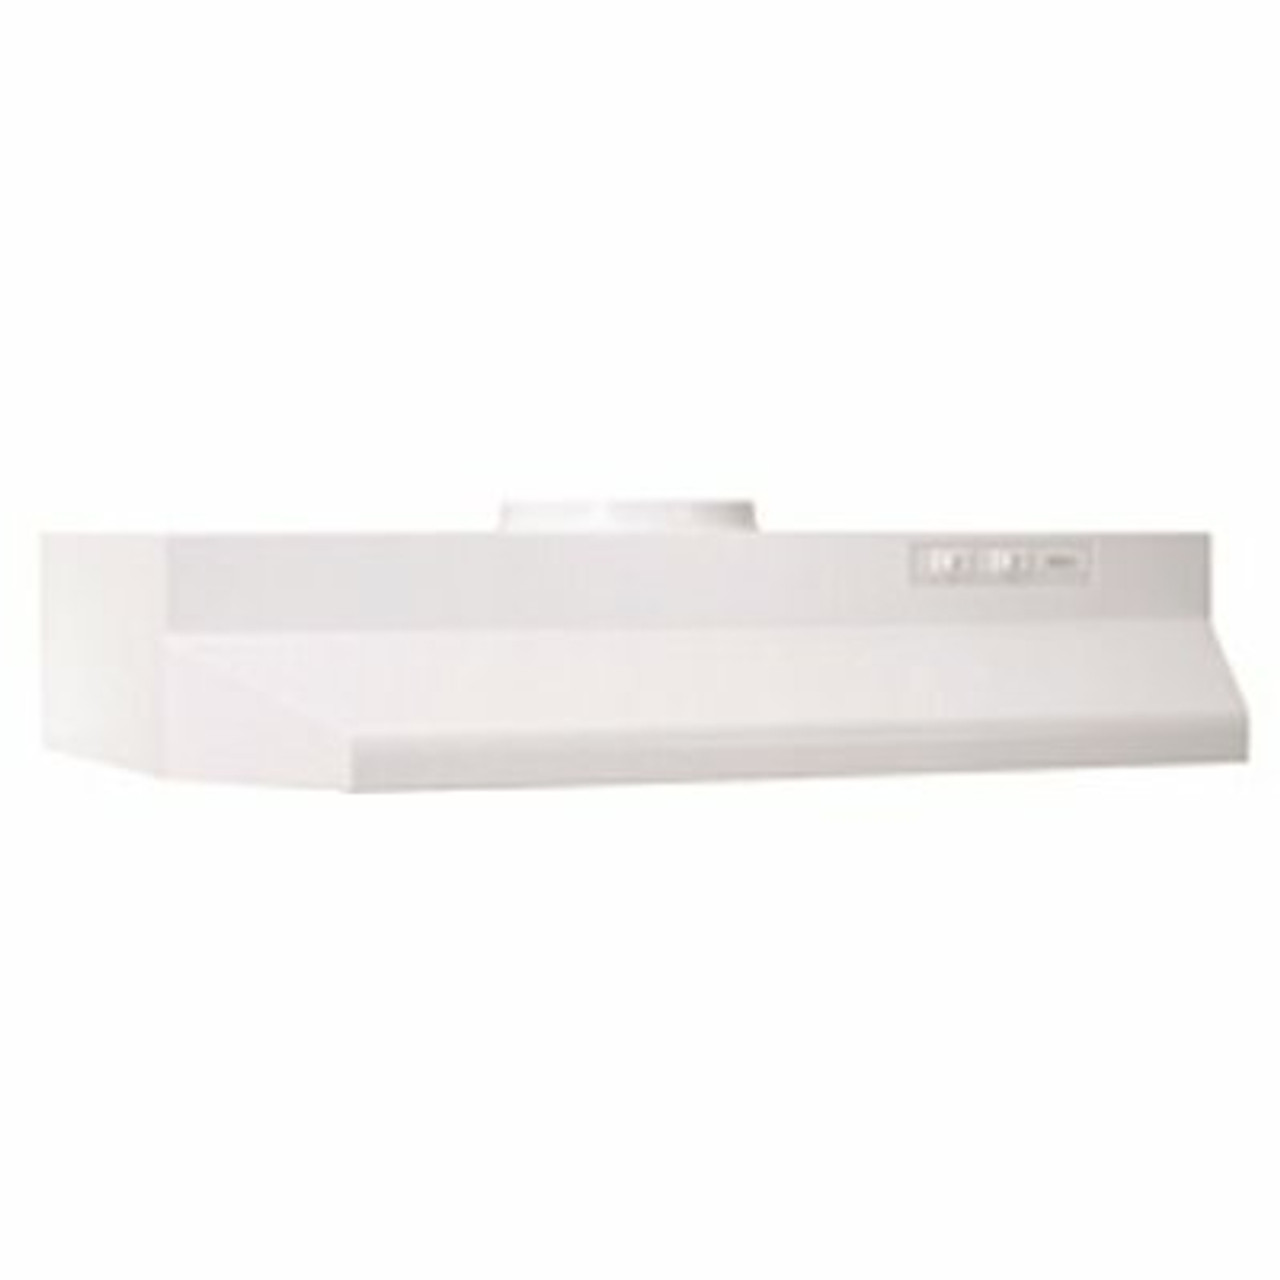 Broan-Nutone Buez2 30 In. 230 Max Blower Cfm Ducted Under-Cabinet Range Hood With Light And Easy Install System In White